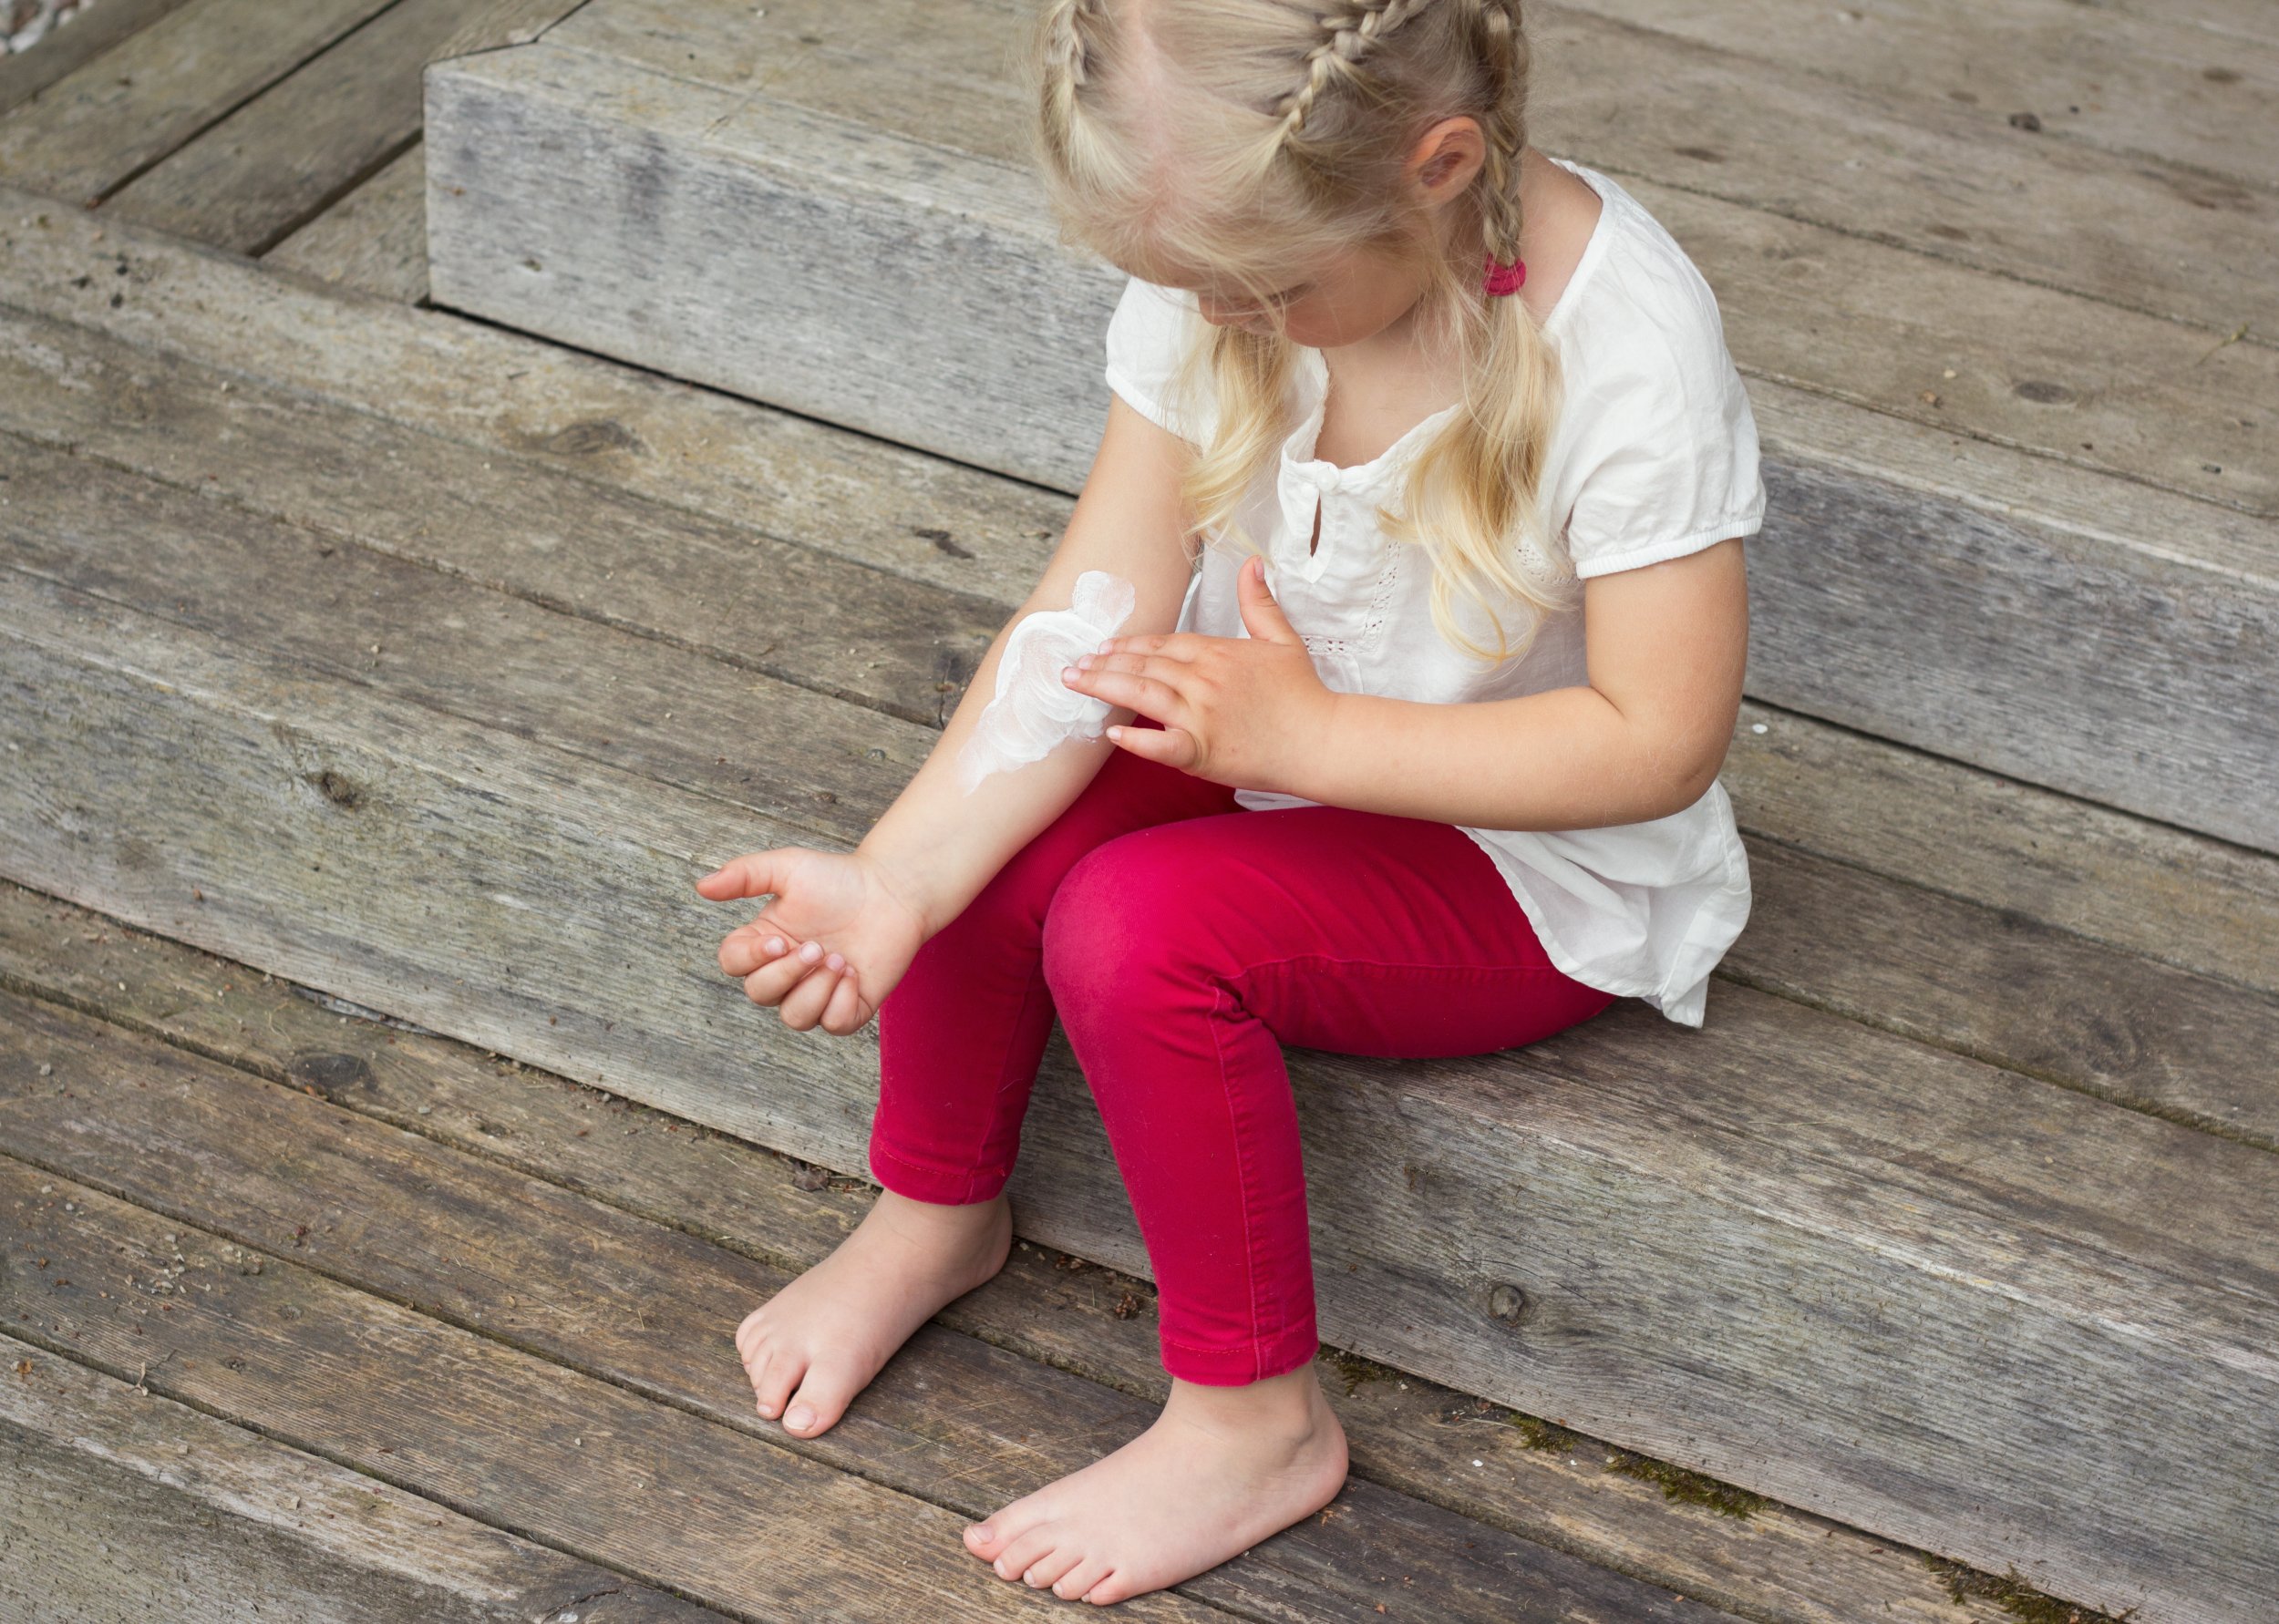 Kids With Eczema Arent Safe With Allergen-Free Lotions